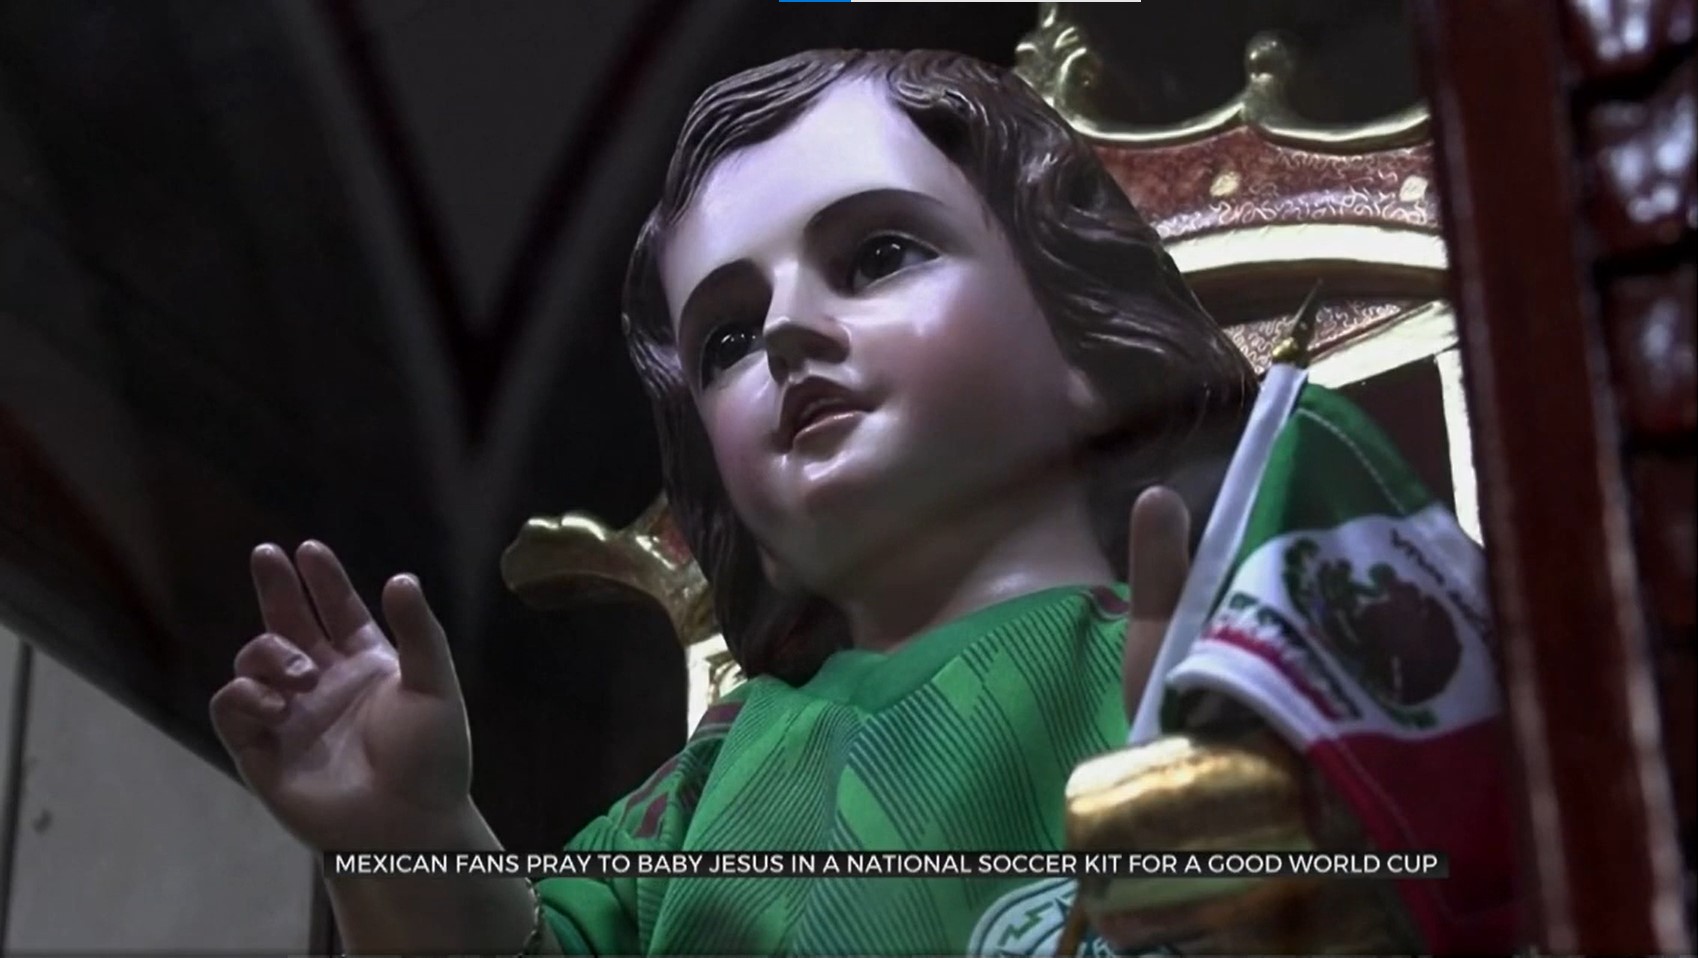 Team Mexico Fans Calling On Divine Intervention In World Cup